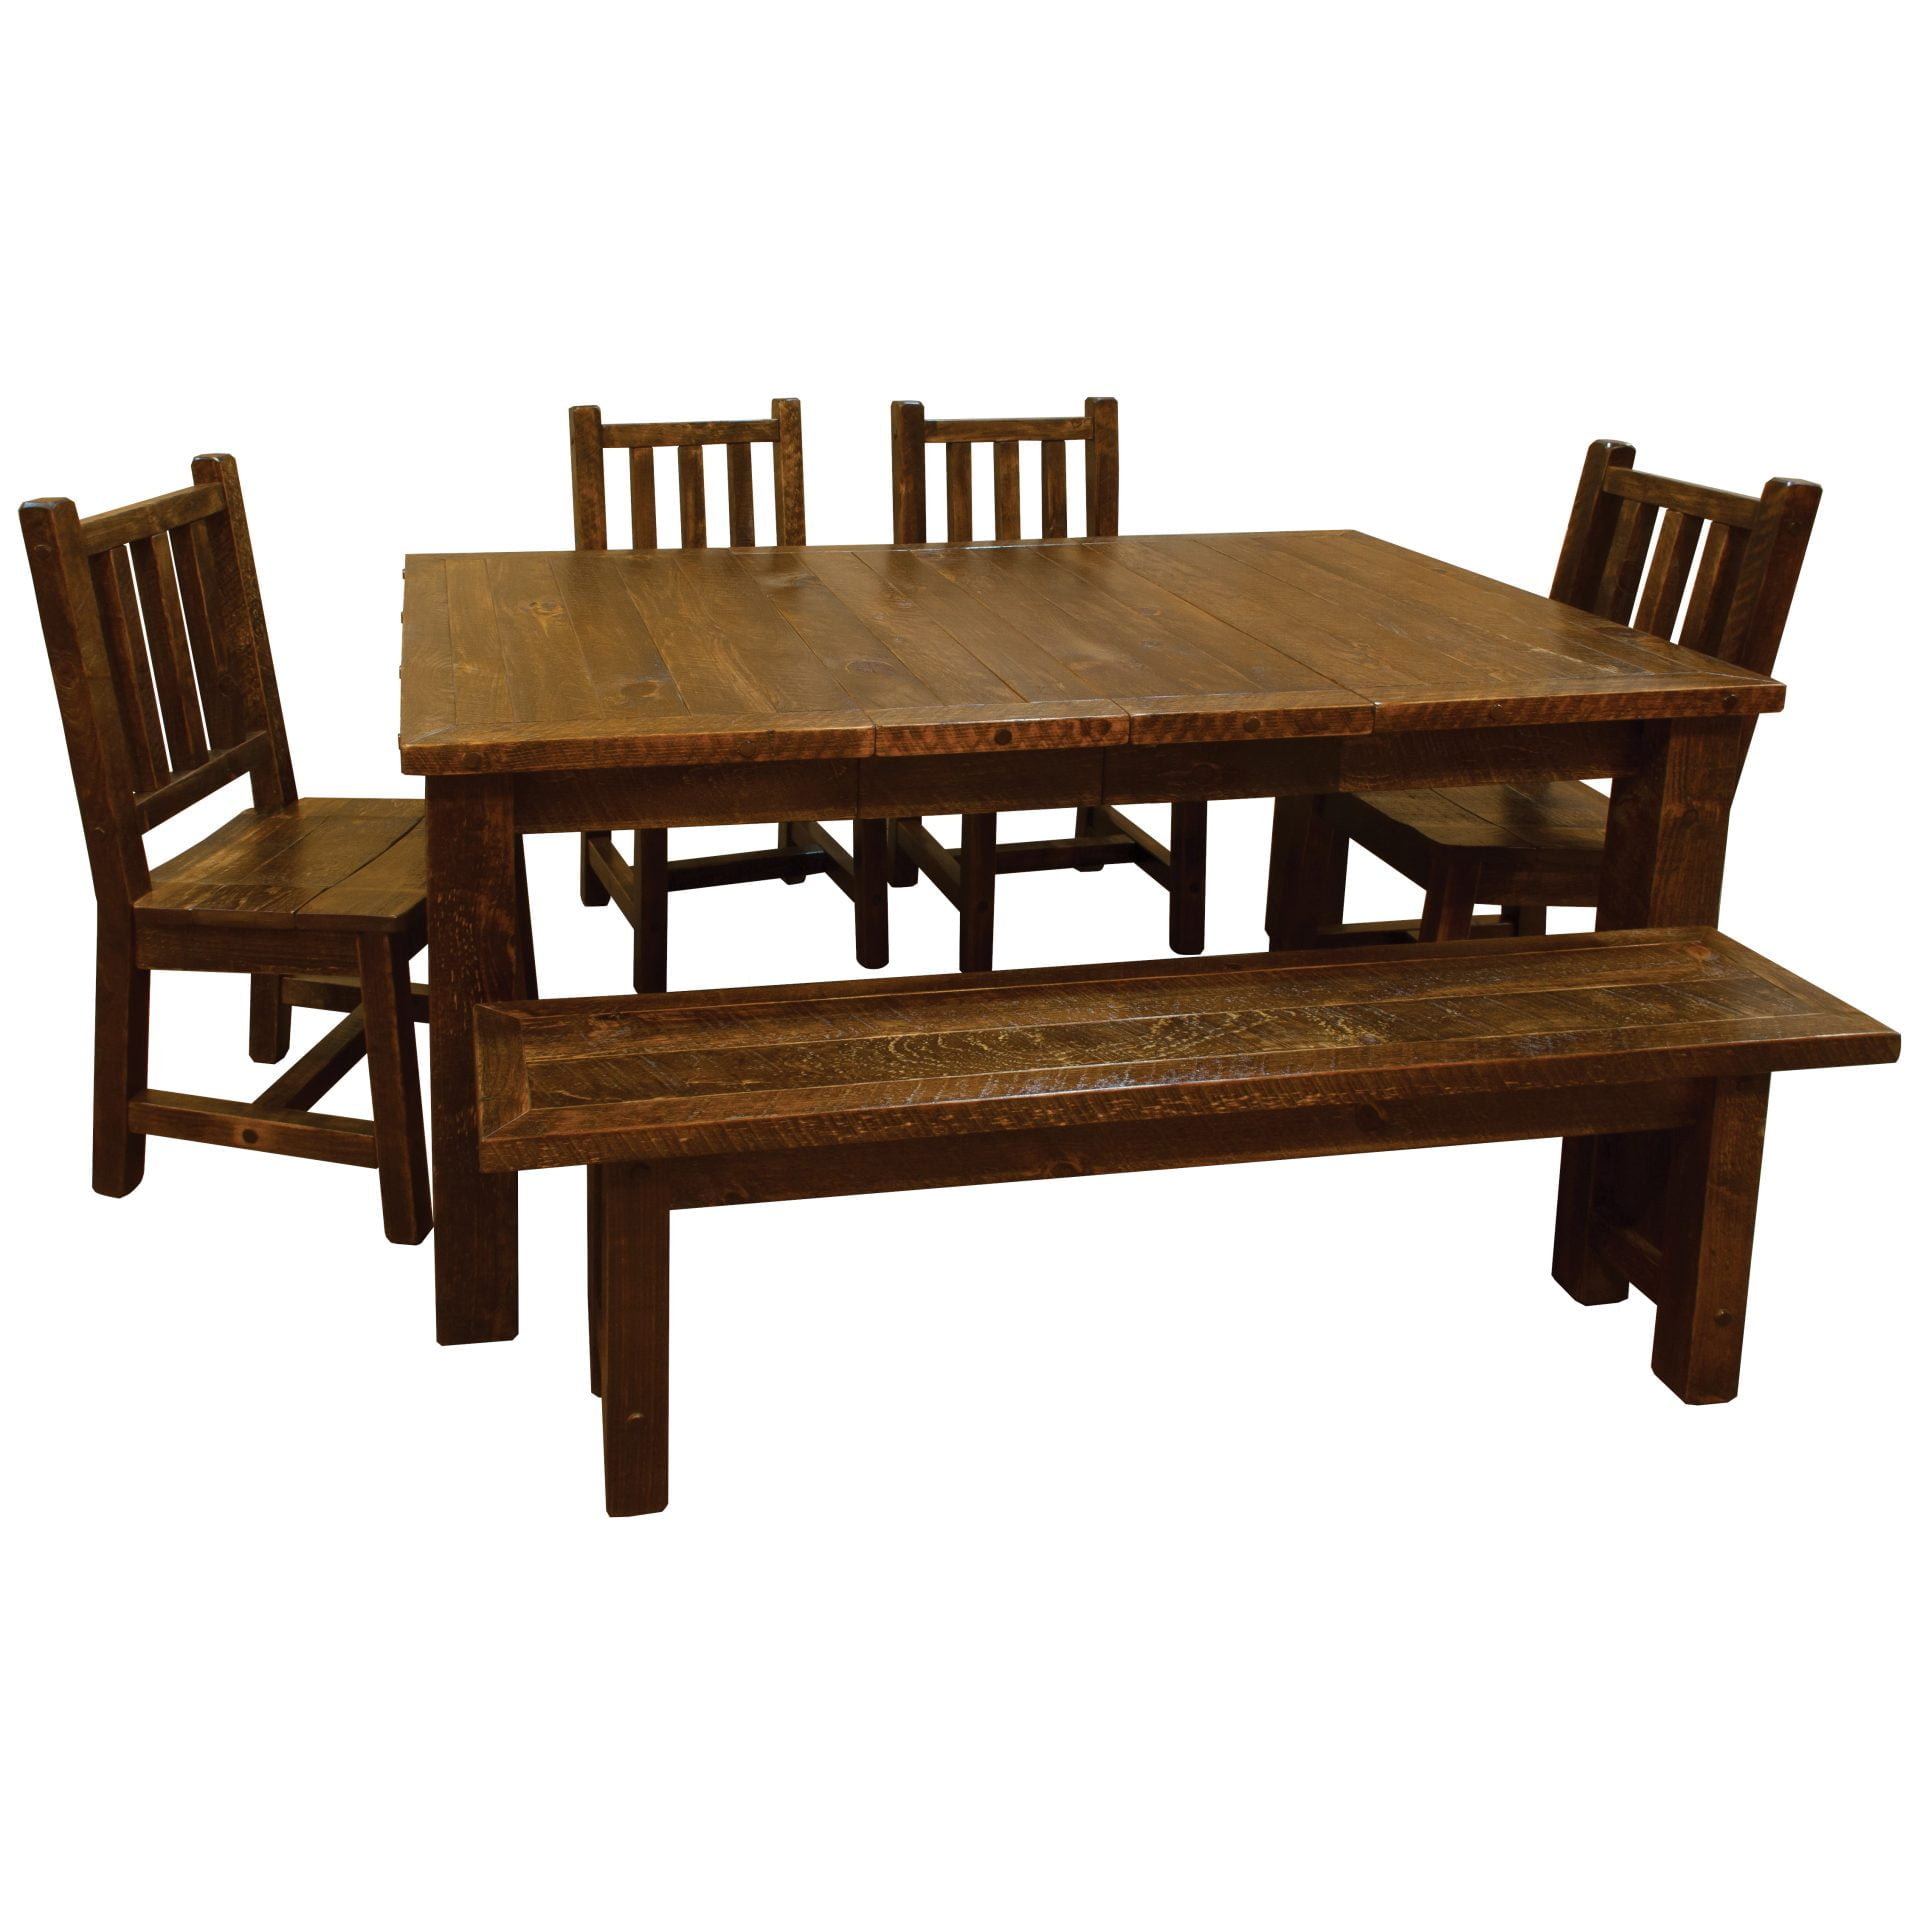 Barnwood Style Timber Peg 6-Piece Extension Dining Set